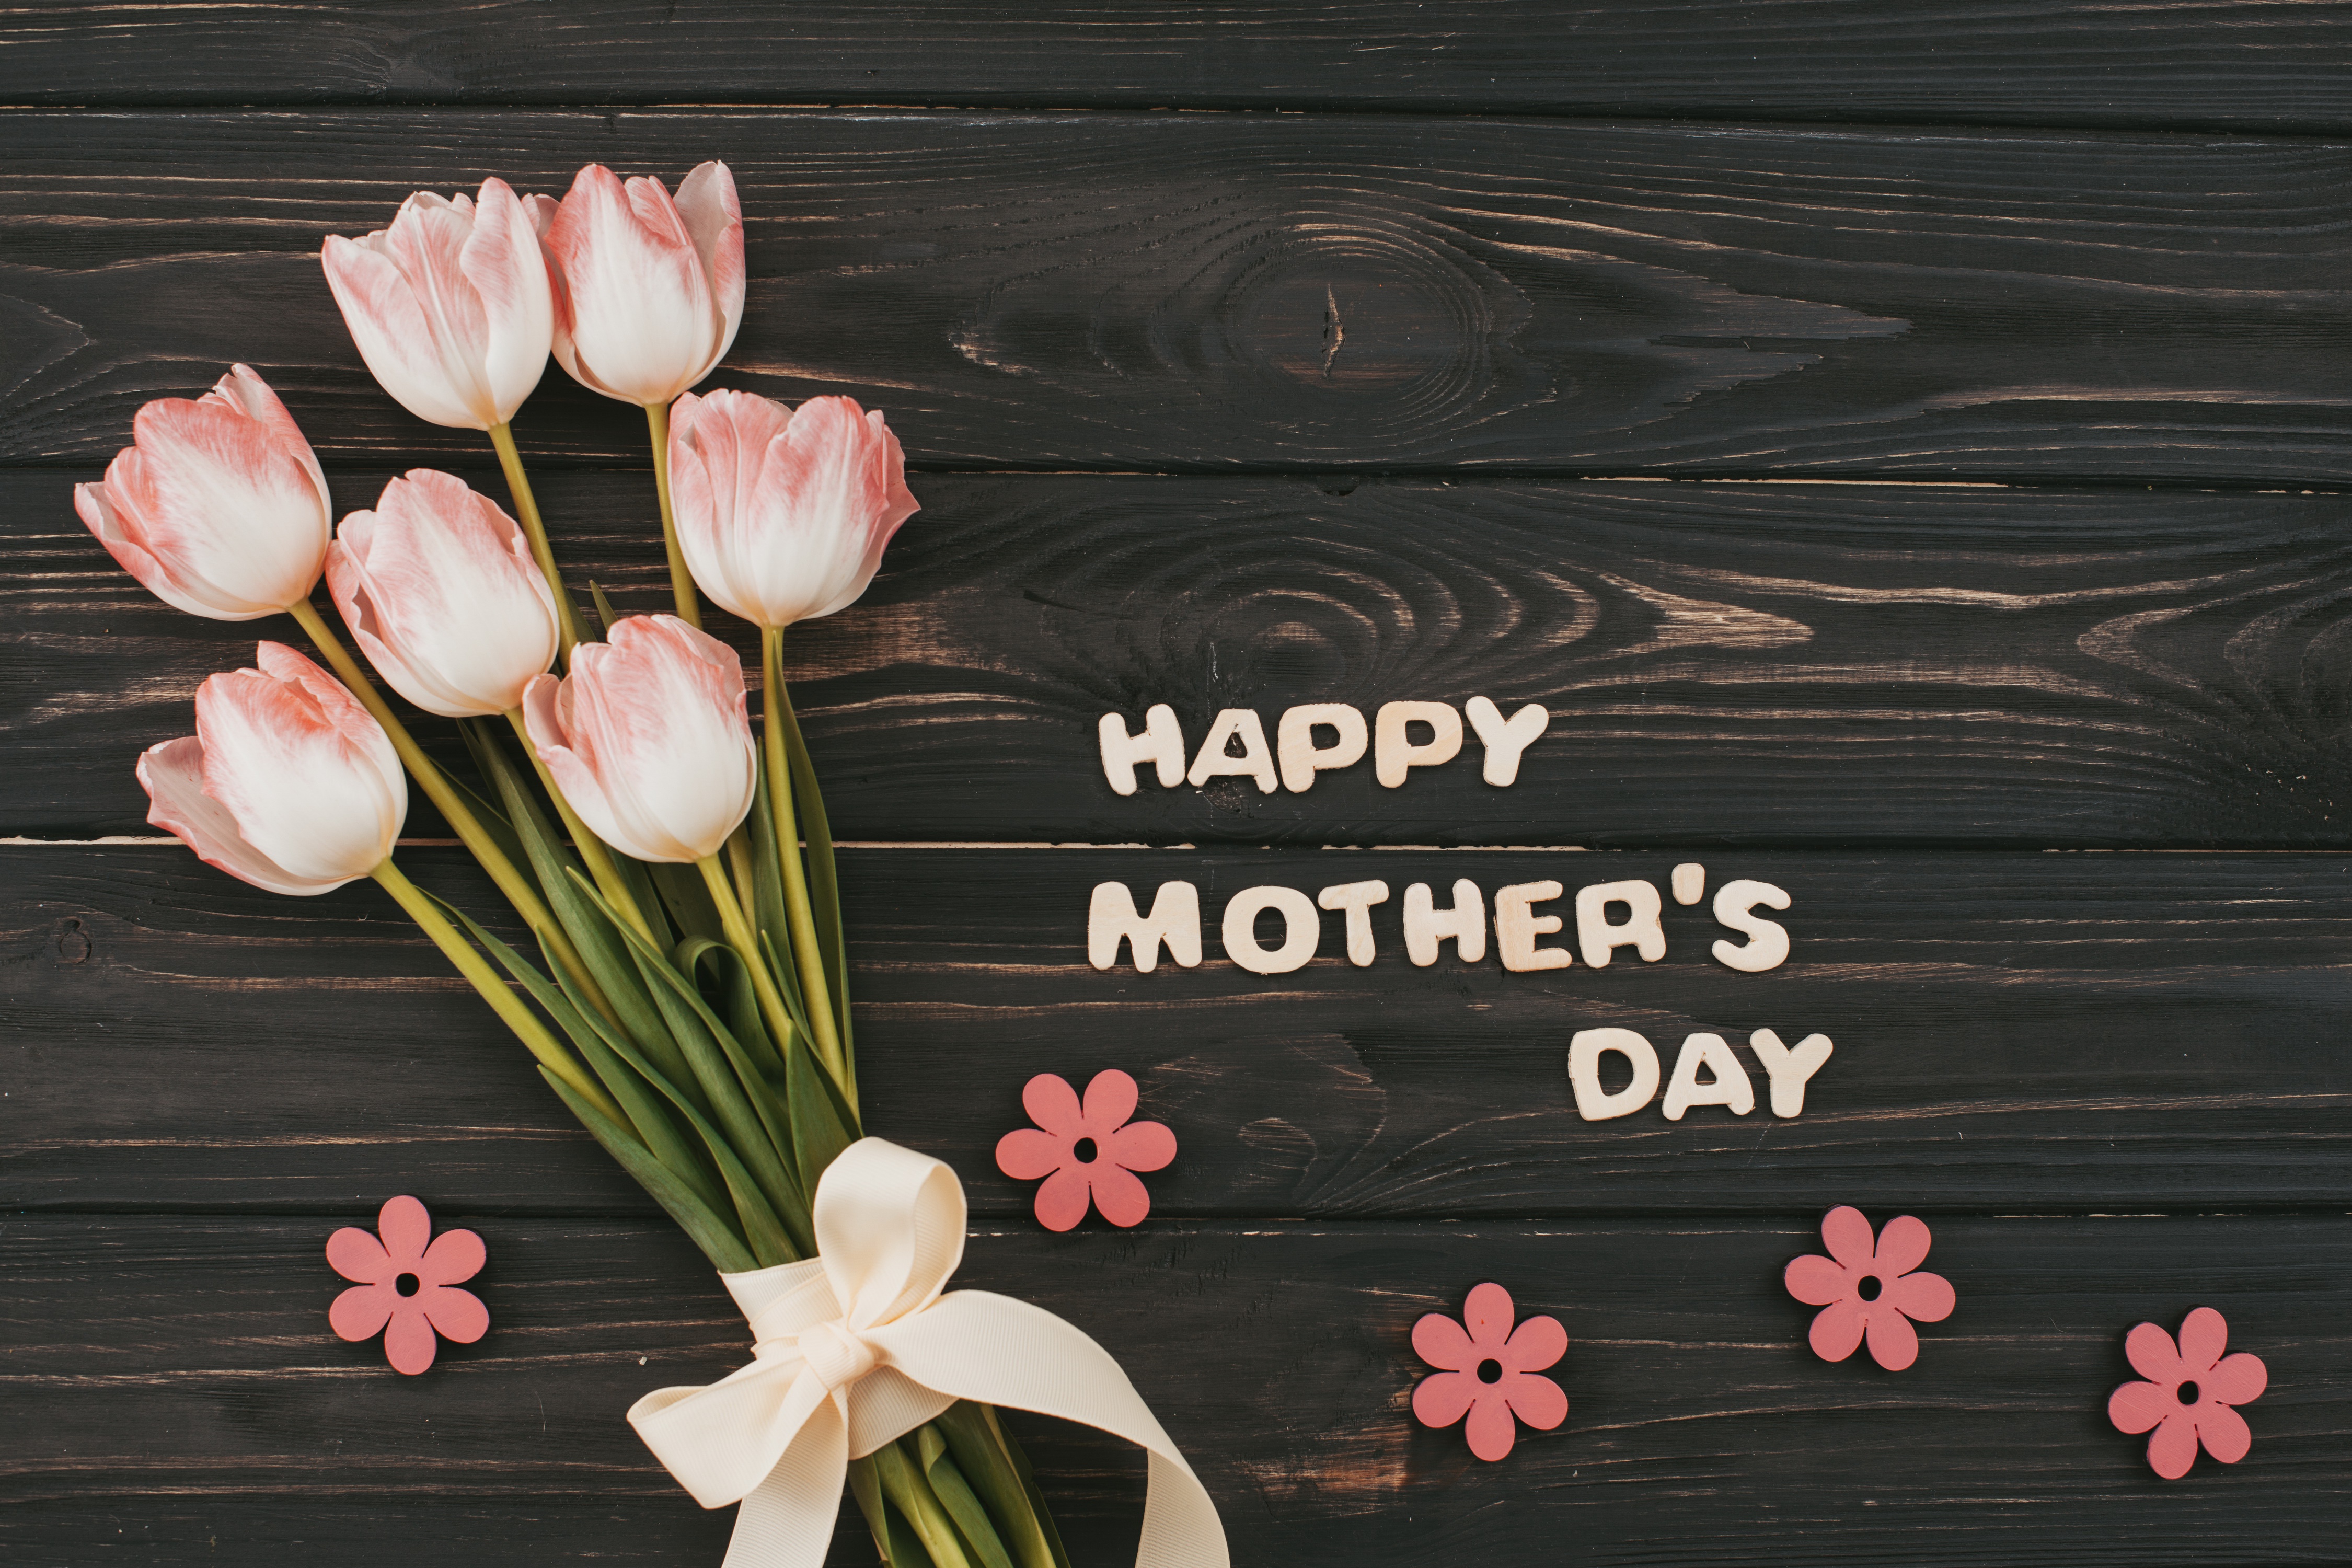 Wallpaper Happy Mothers Day Holidays 21467